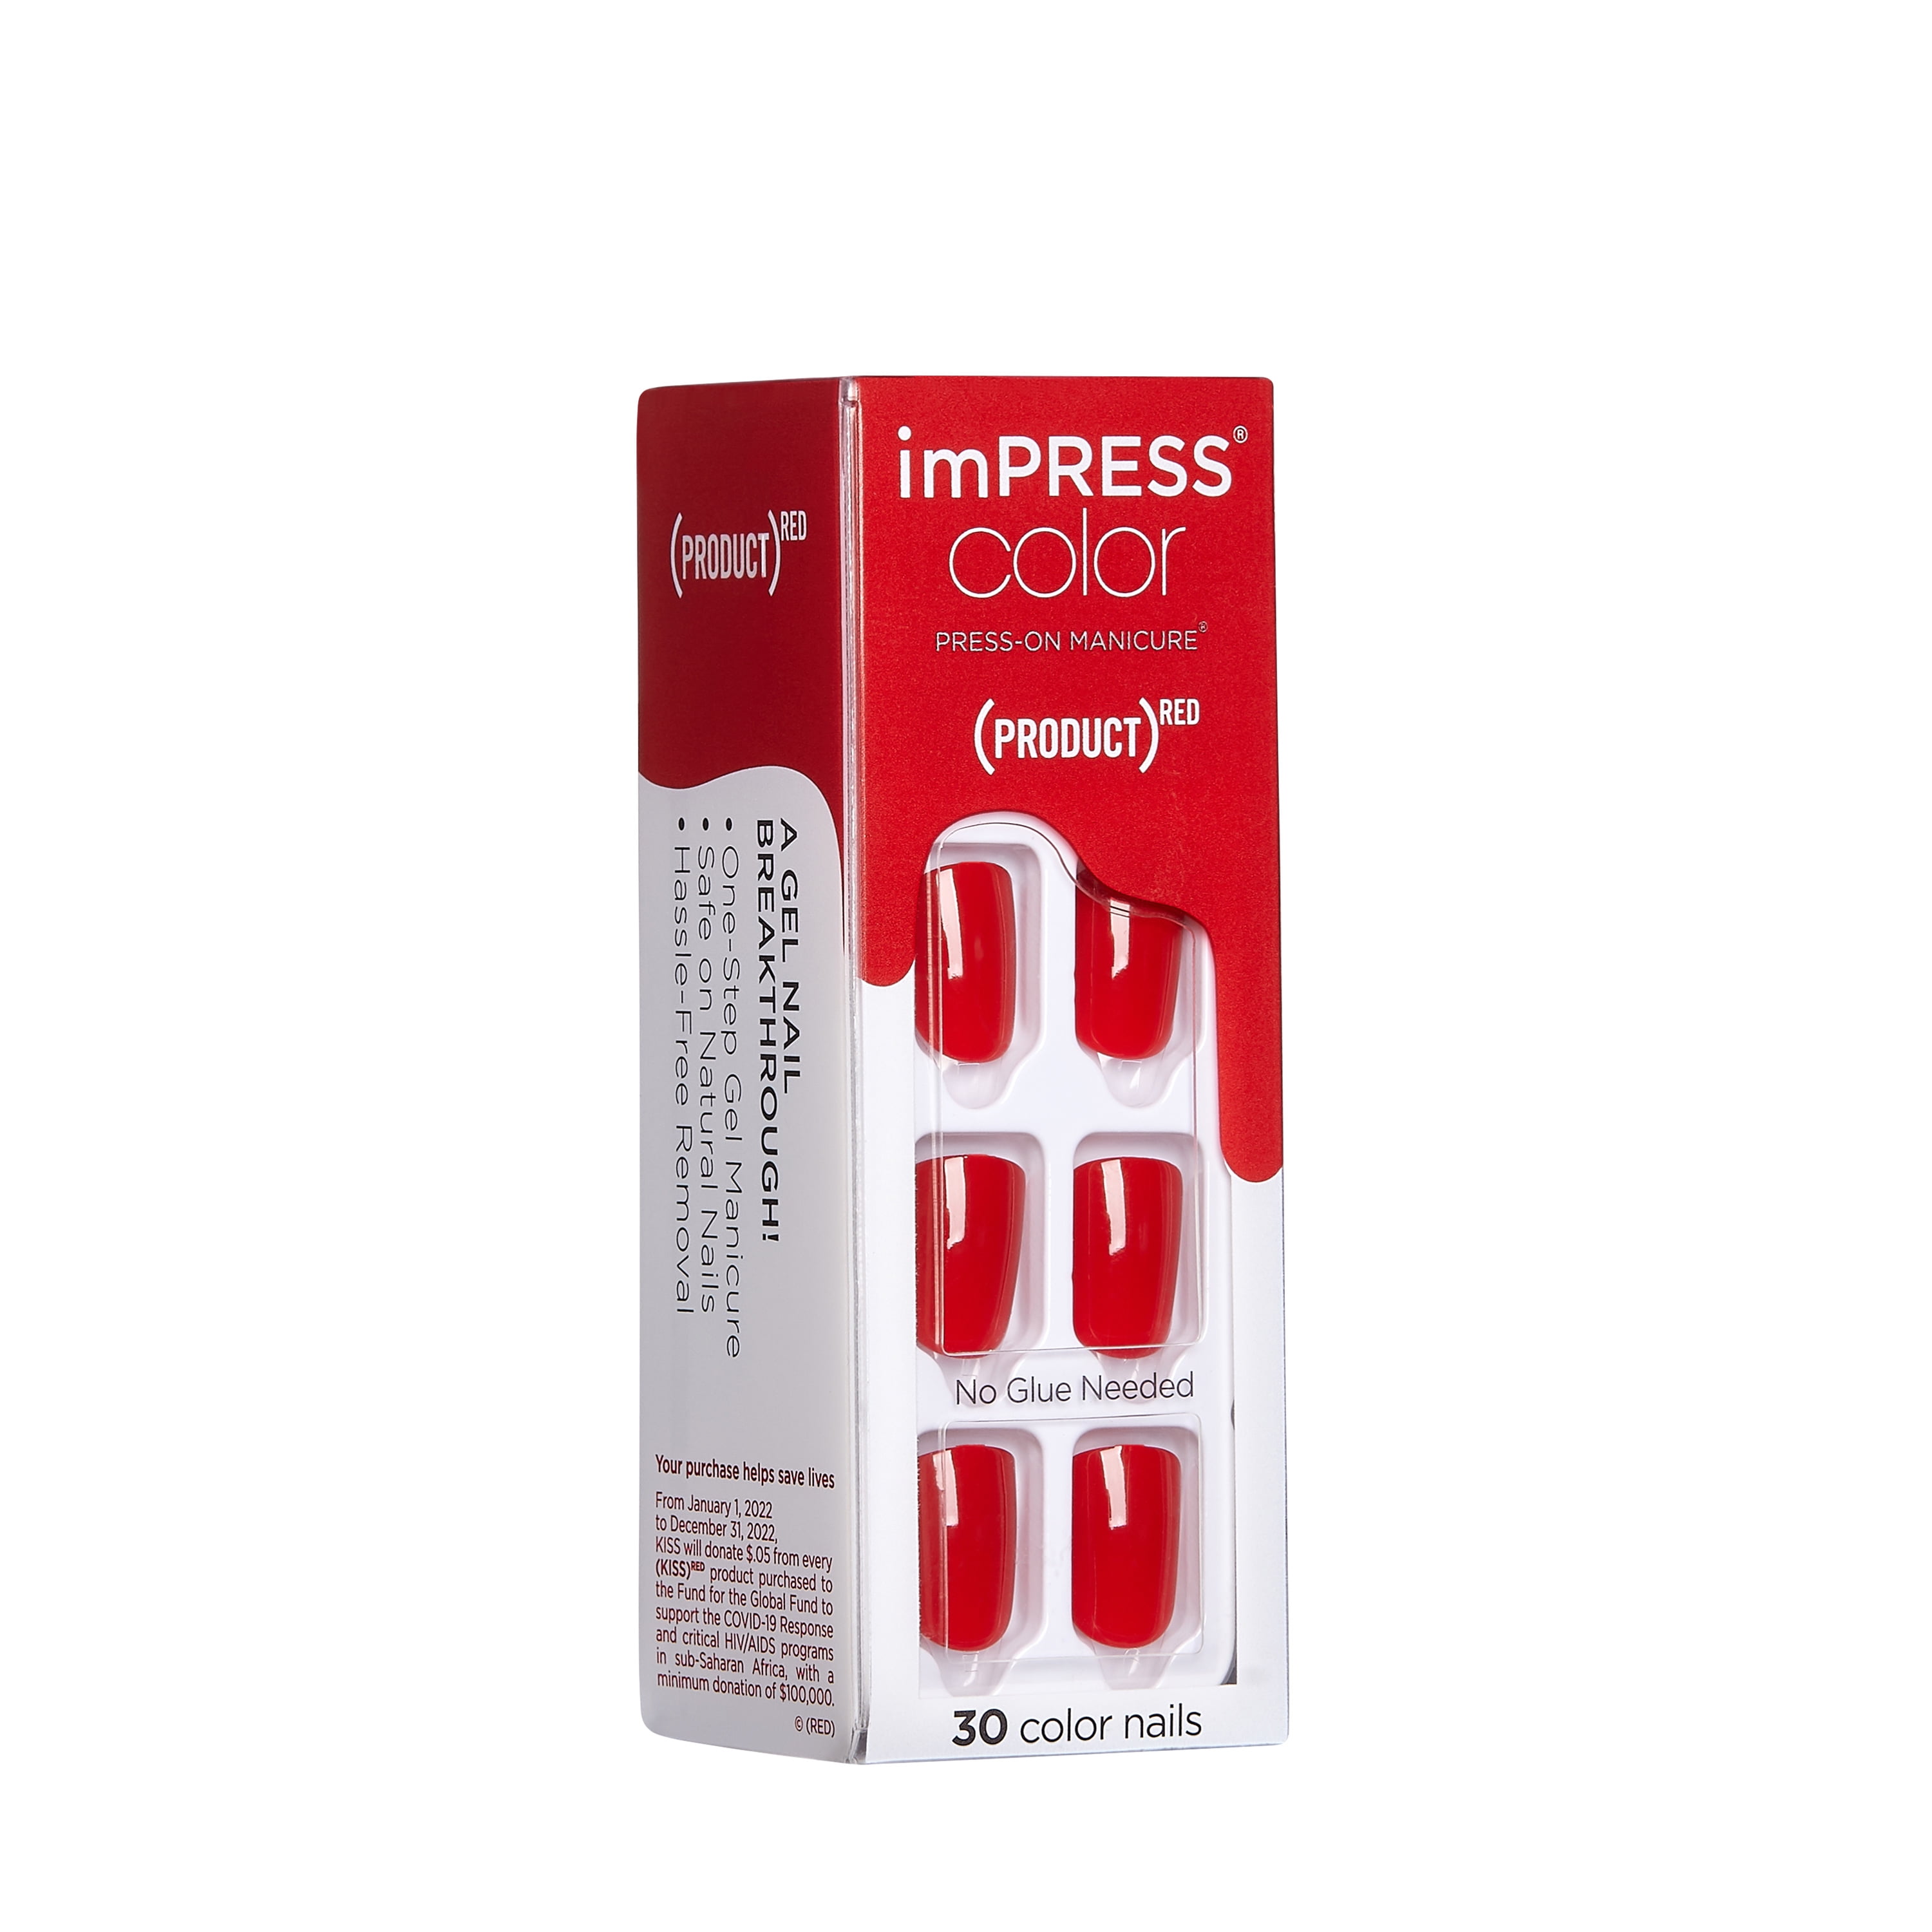 KISS imPRESS Color Press-On Nails, (Product)Red, 'Red Impact', 30 Count -  